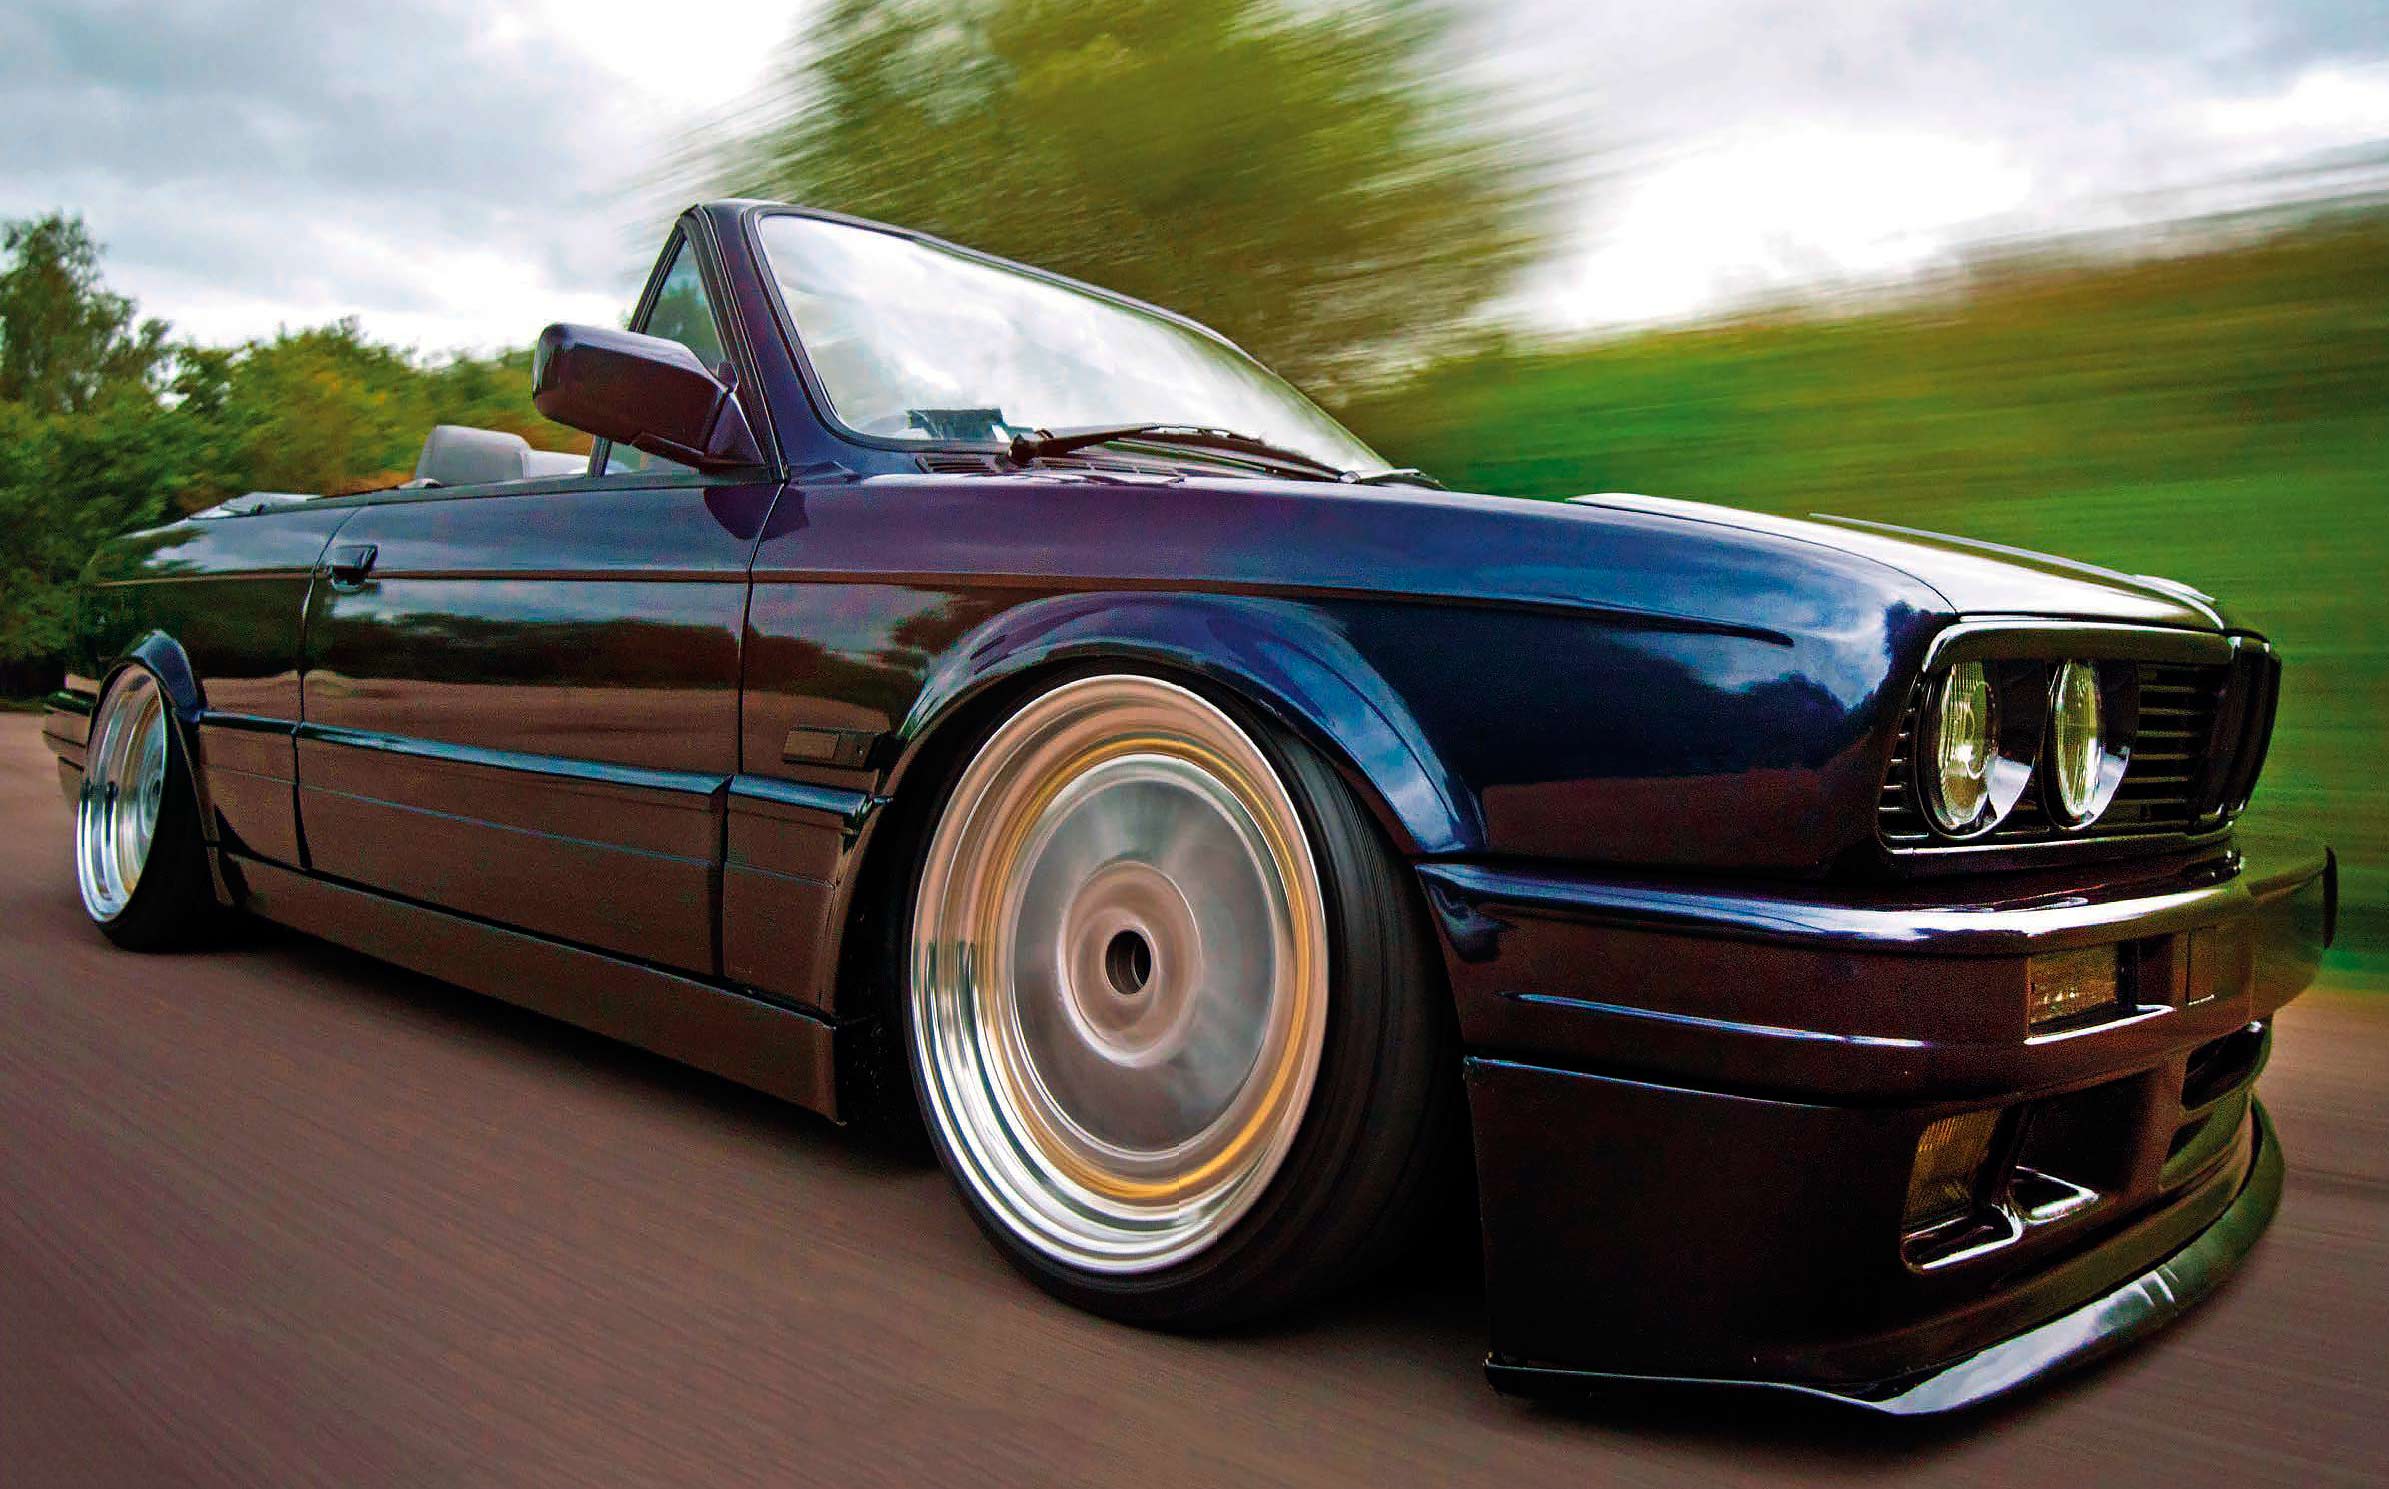 Stunning S54-swapped BMW E30 Cabrio - Drive-My Blogs - Drive